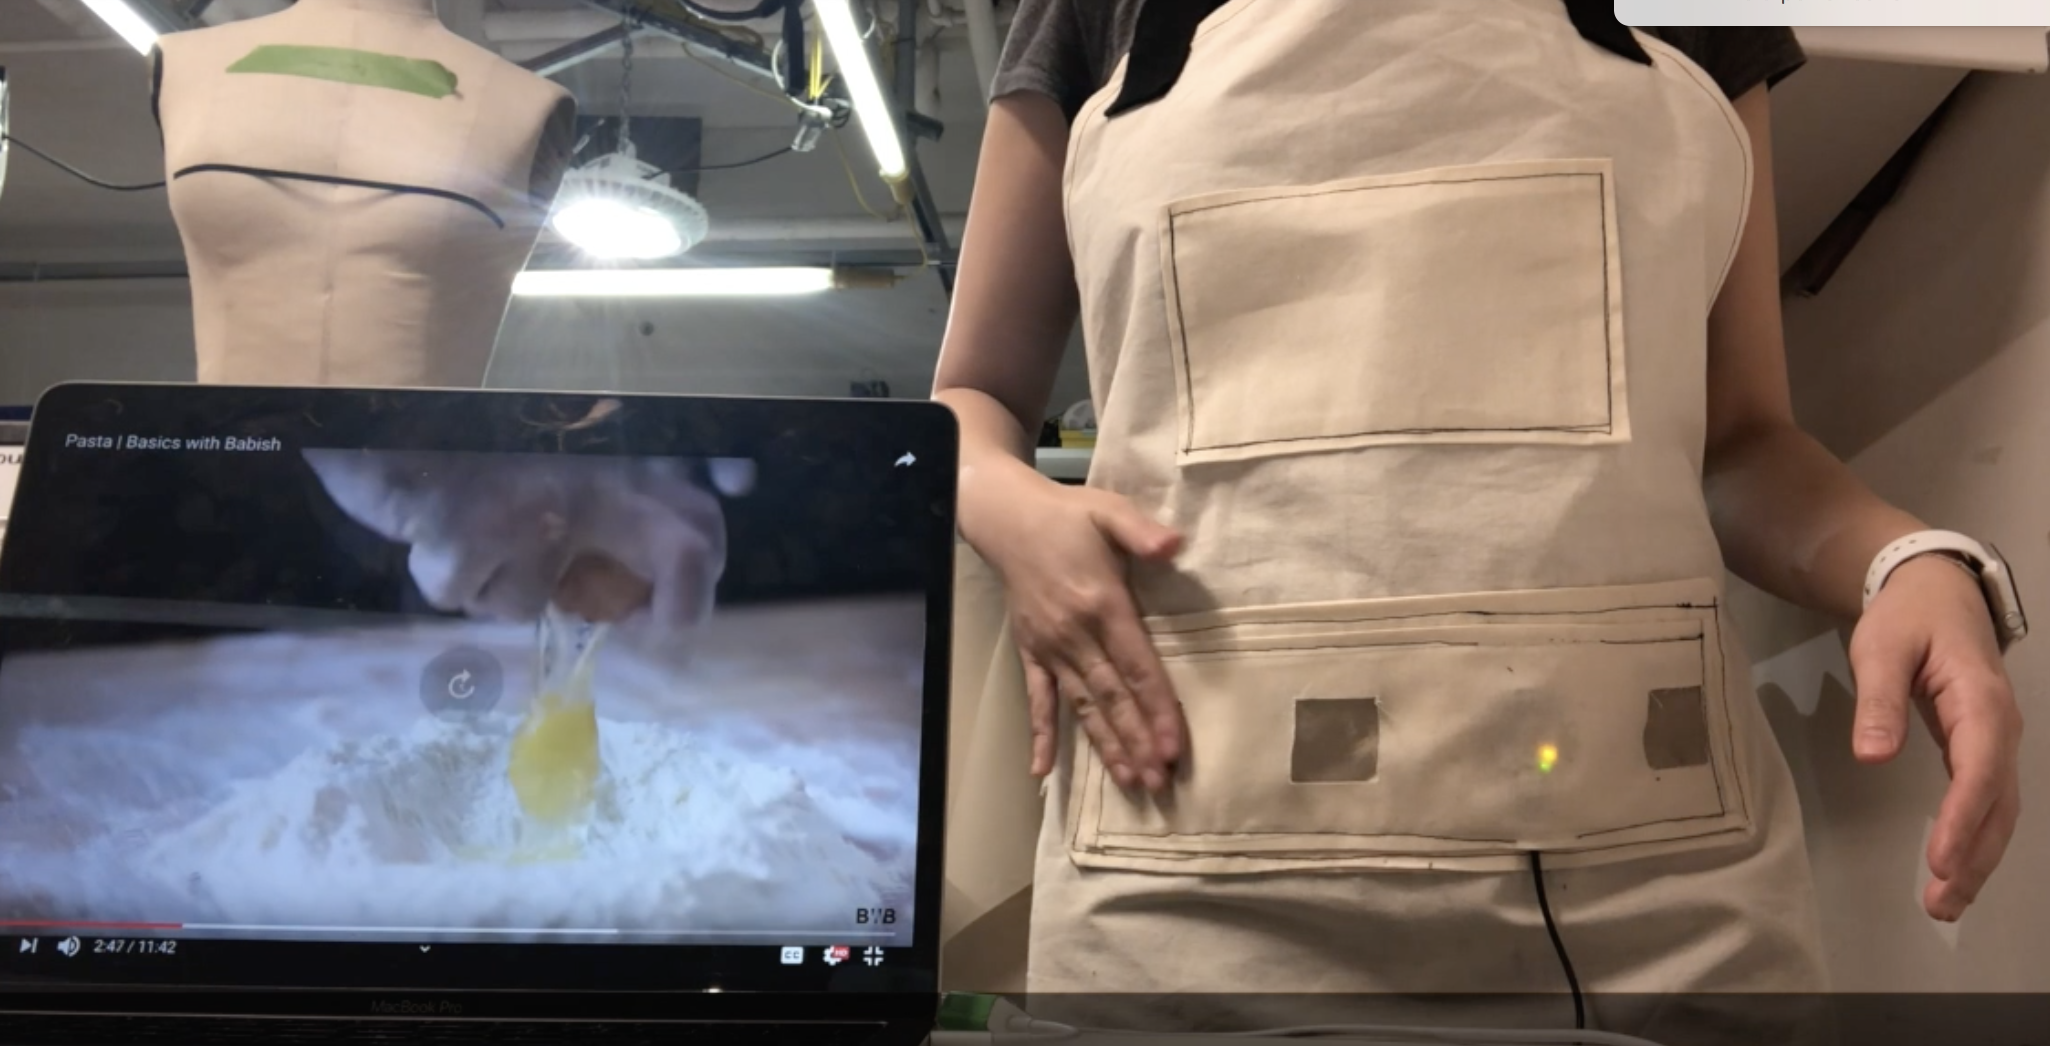 Video player App controlled by Apron (wearable tech design + mobile App)